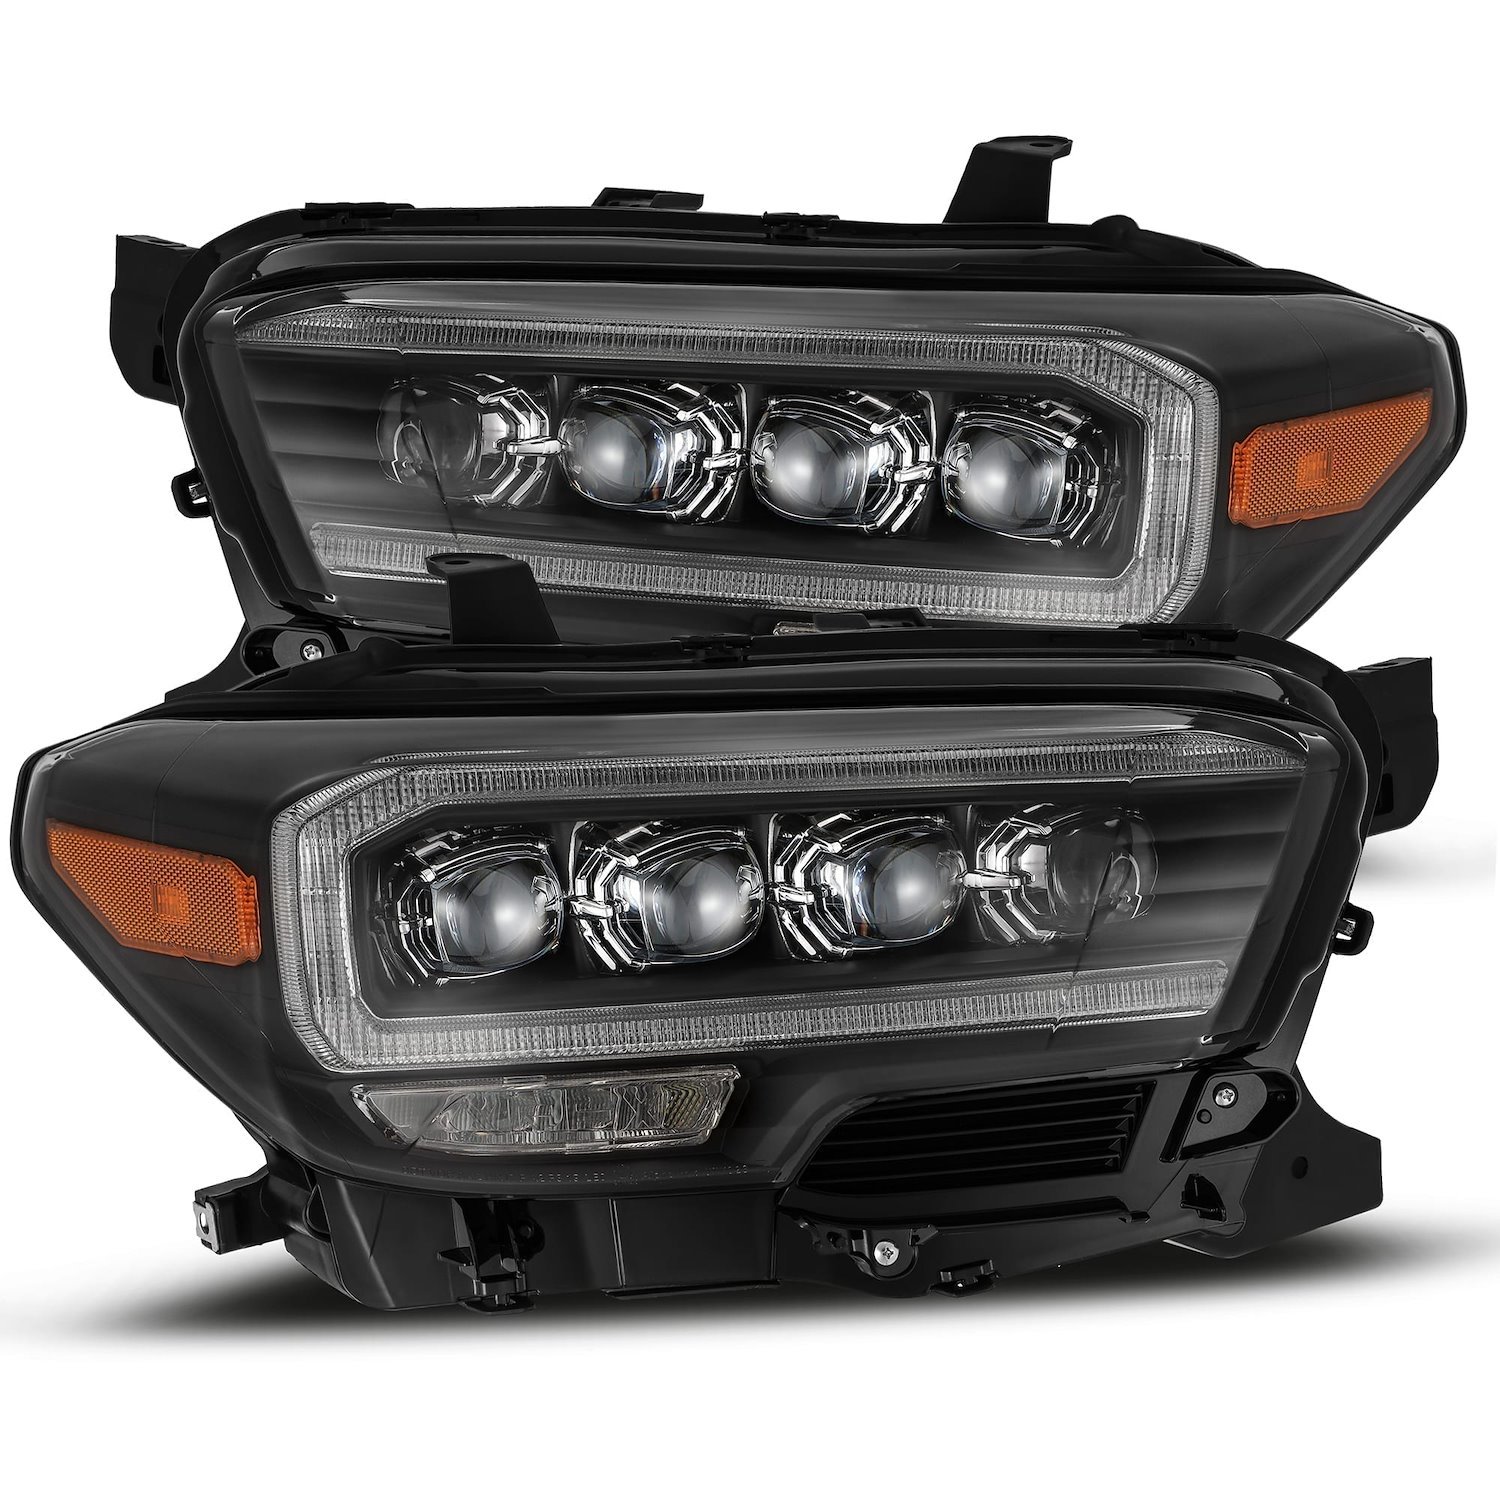 880707 NOVA-Series LED Projector Headlights Fits Select Toyota Tacoma - Plank Style Design in Black